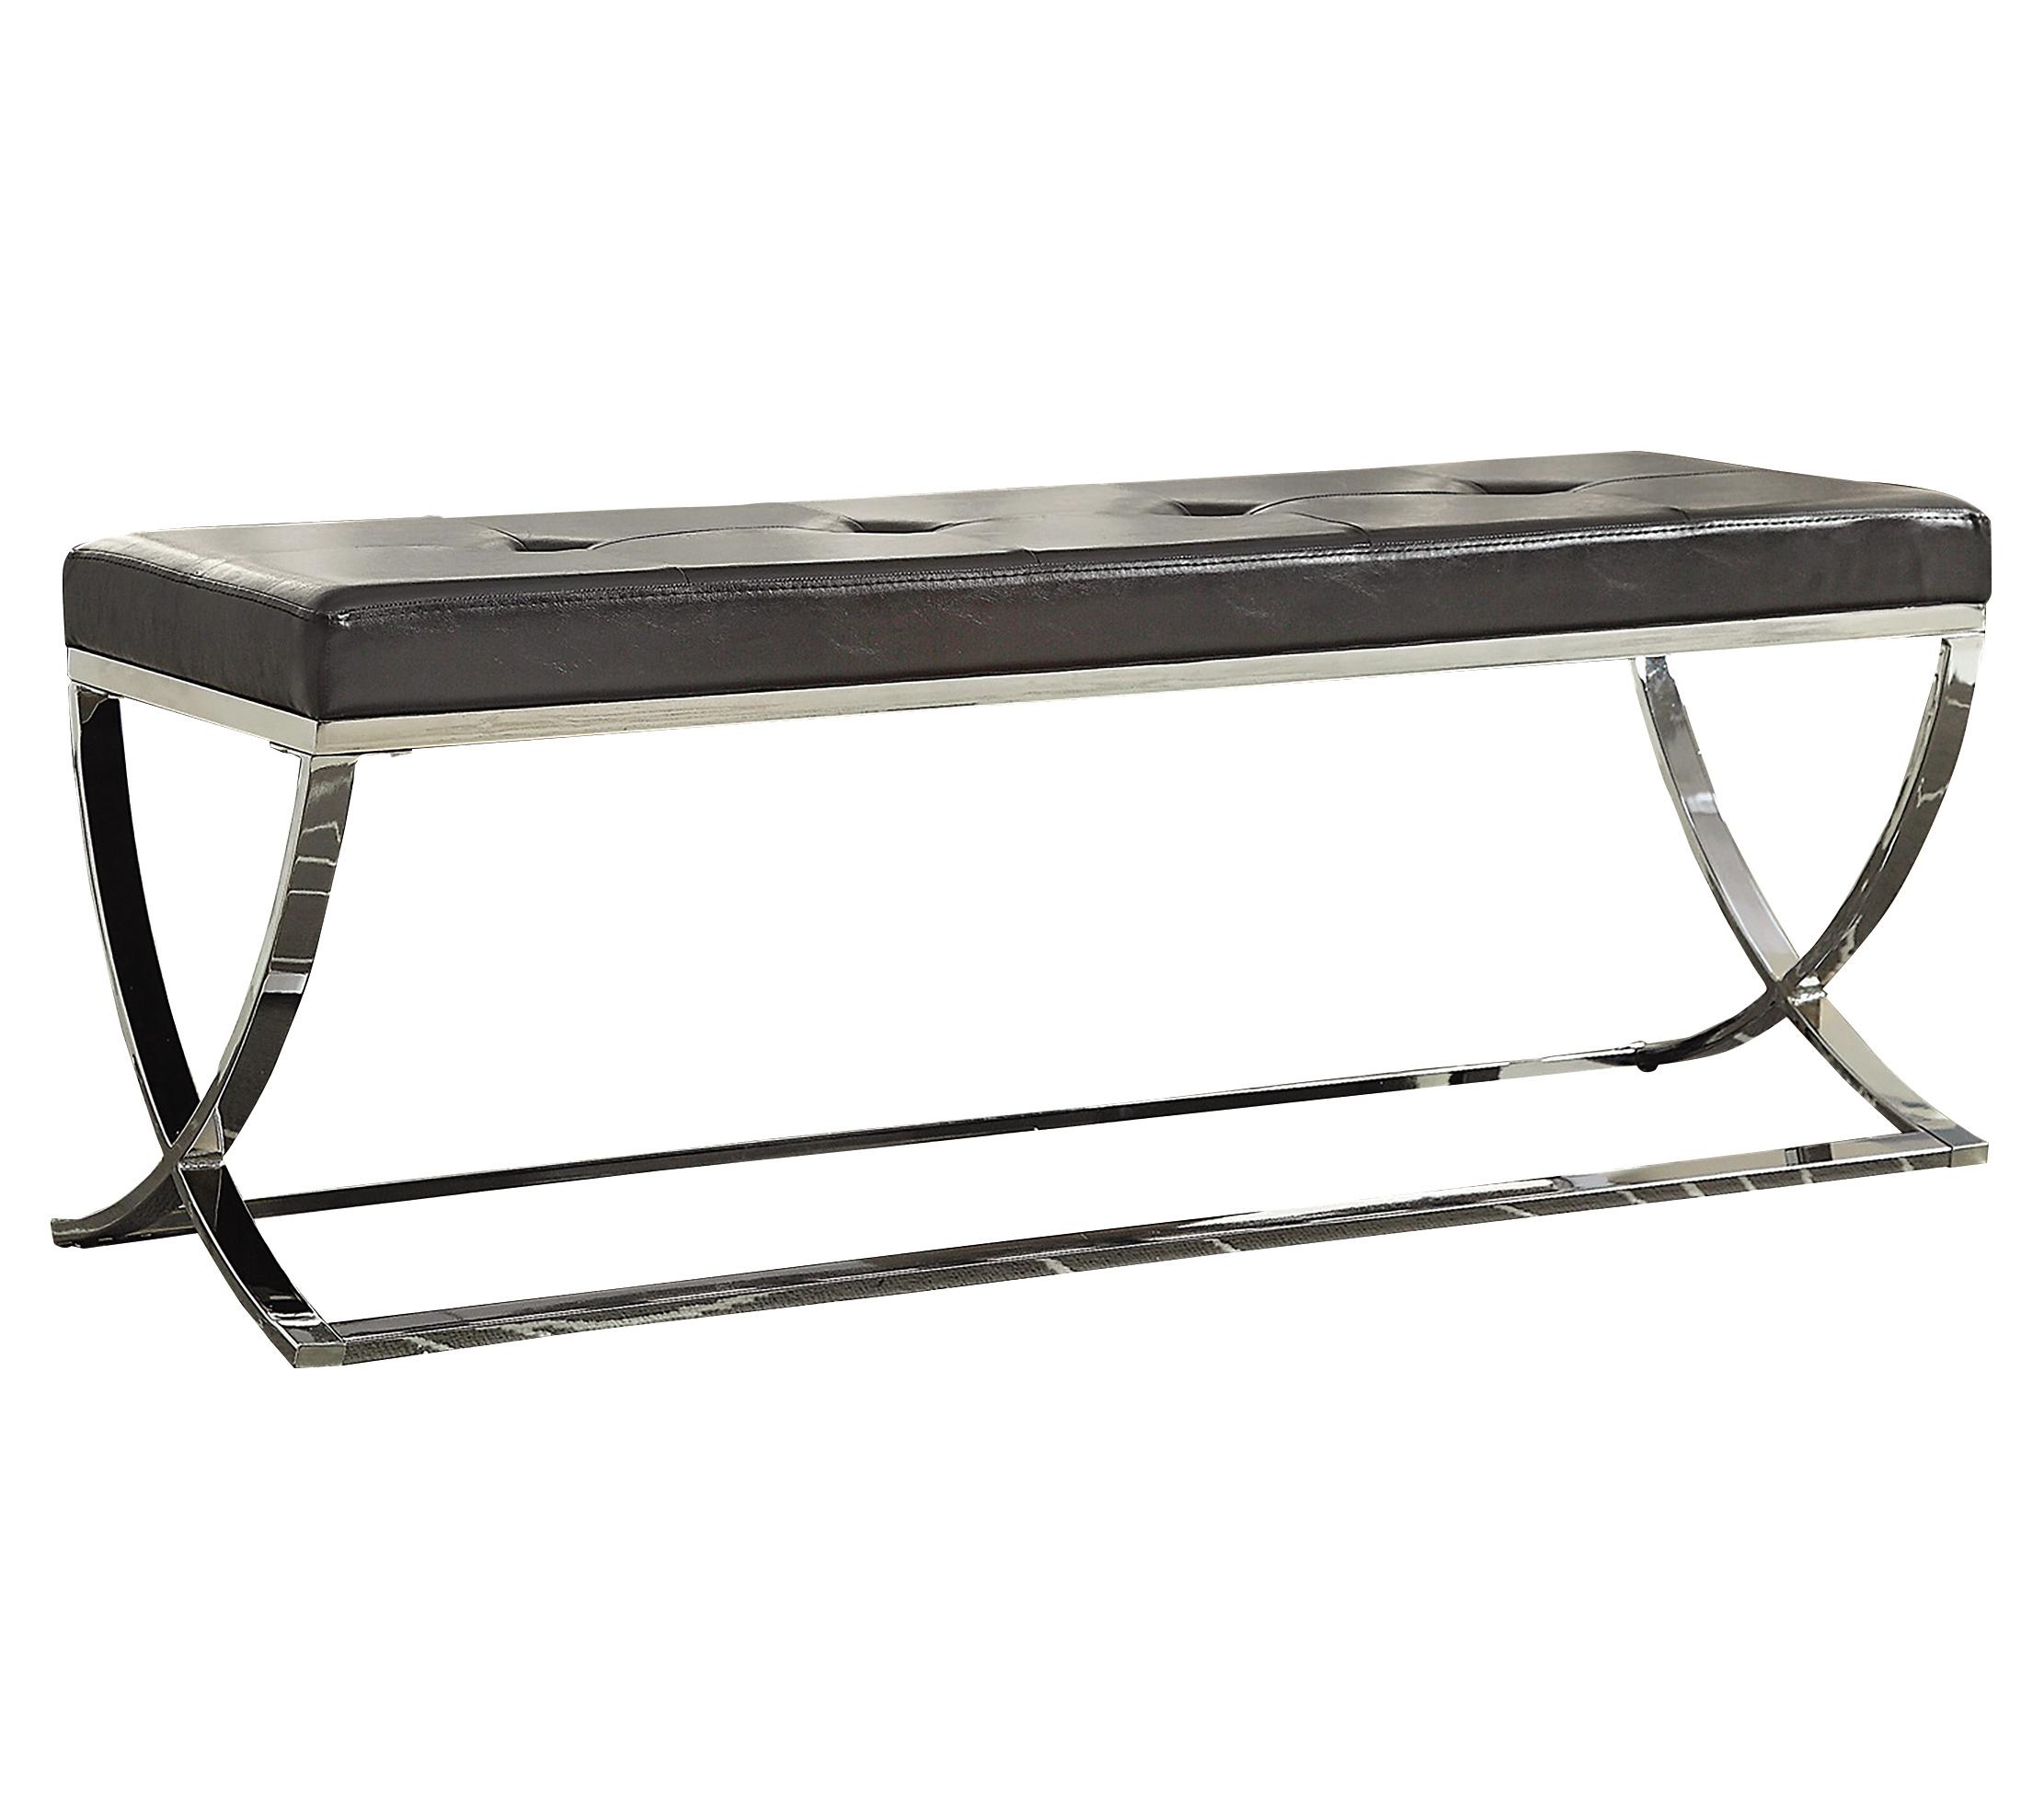 Contemporary Bench 501156 501156 in Black Leatherette